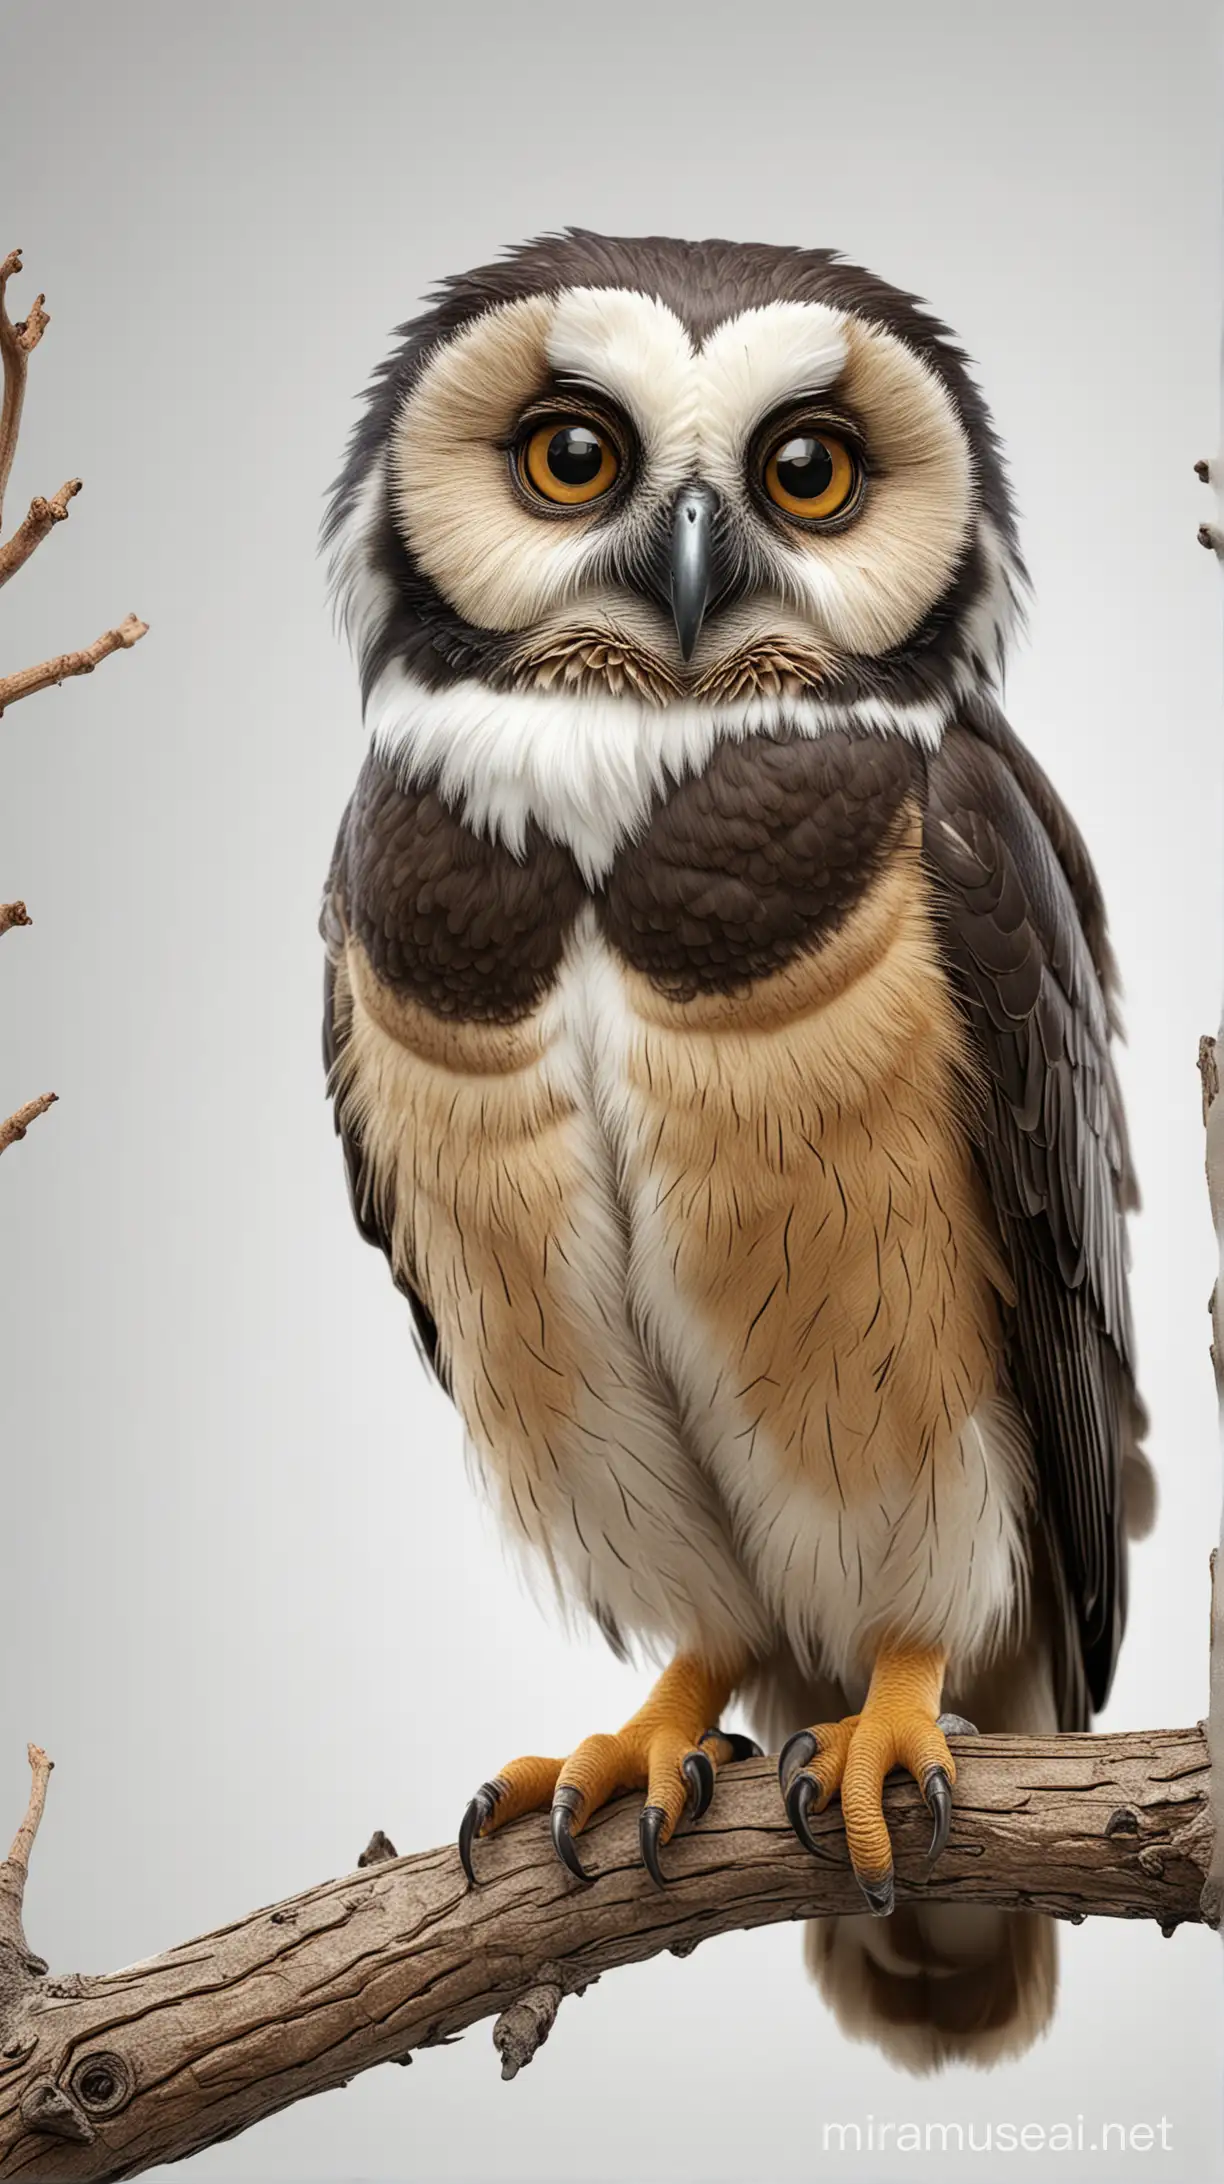 Realistic 3D Digital Image of a Spectacled Owl Perched on a Branch